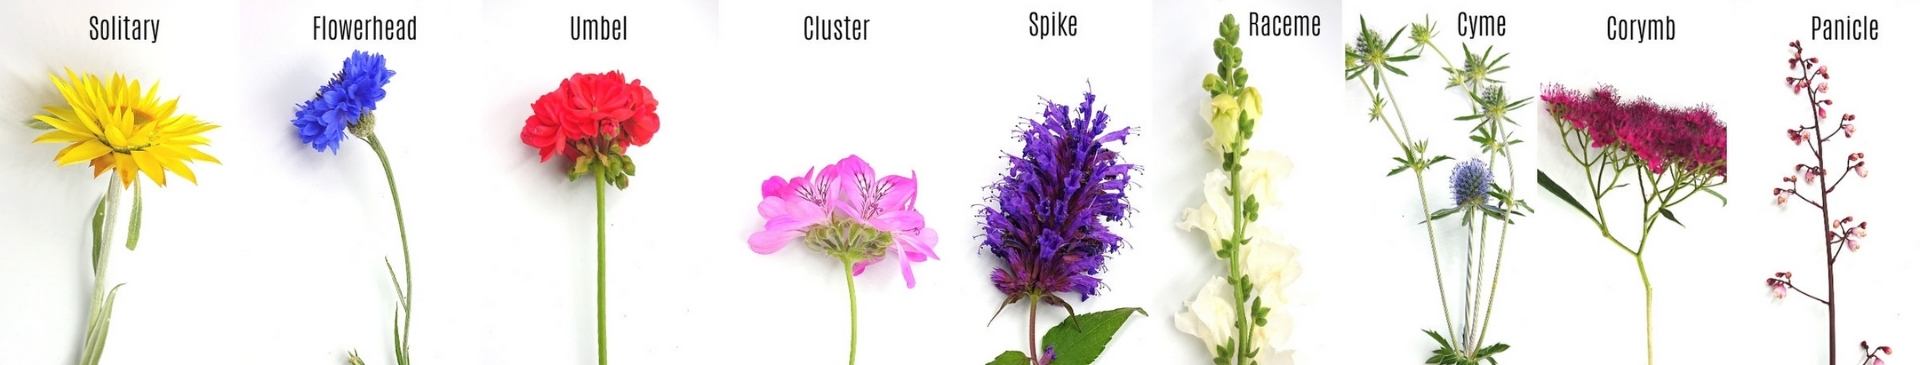 A Brief Guide to the Different Flower Types, Shapes, and Growing Patterns 